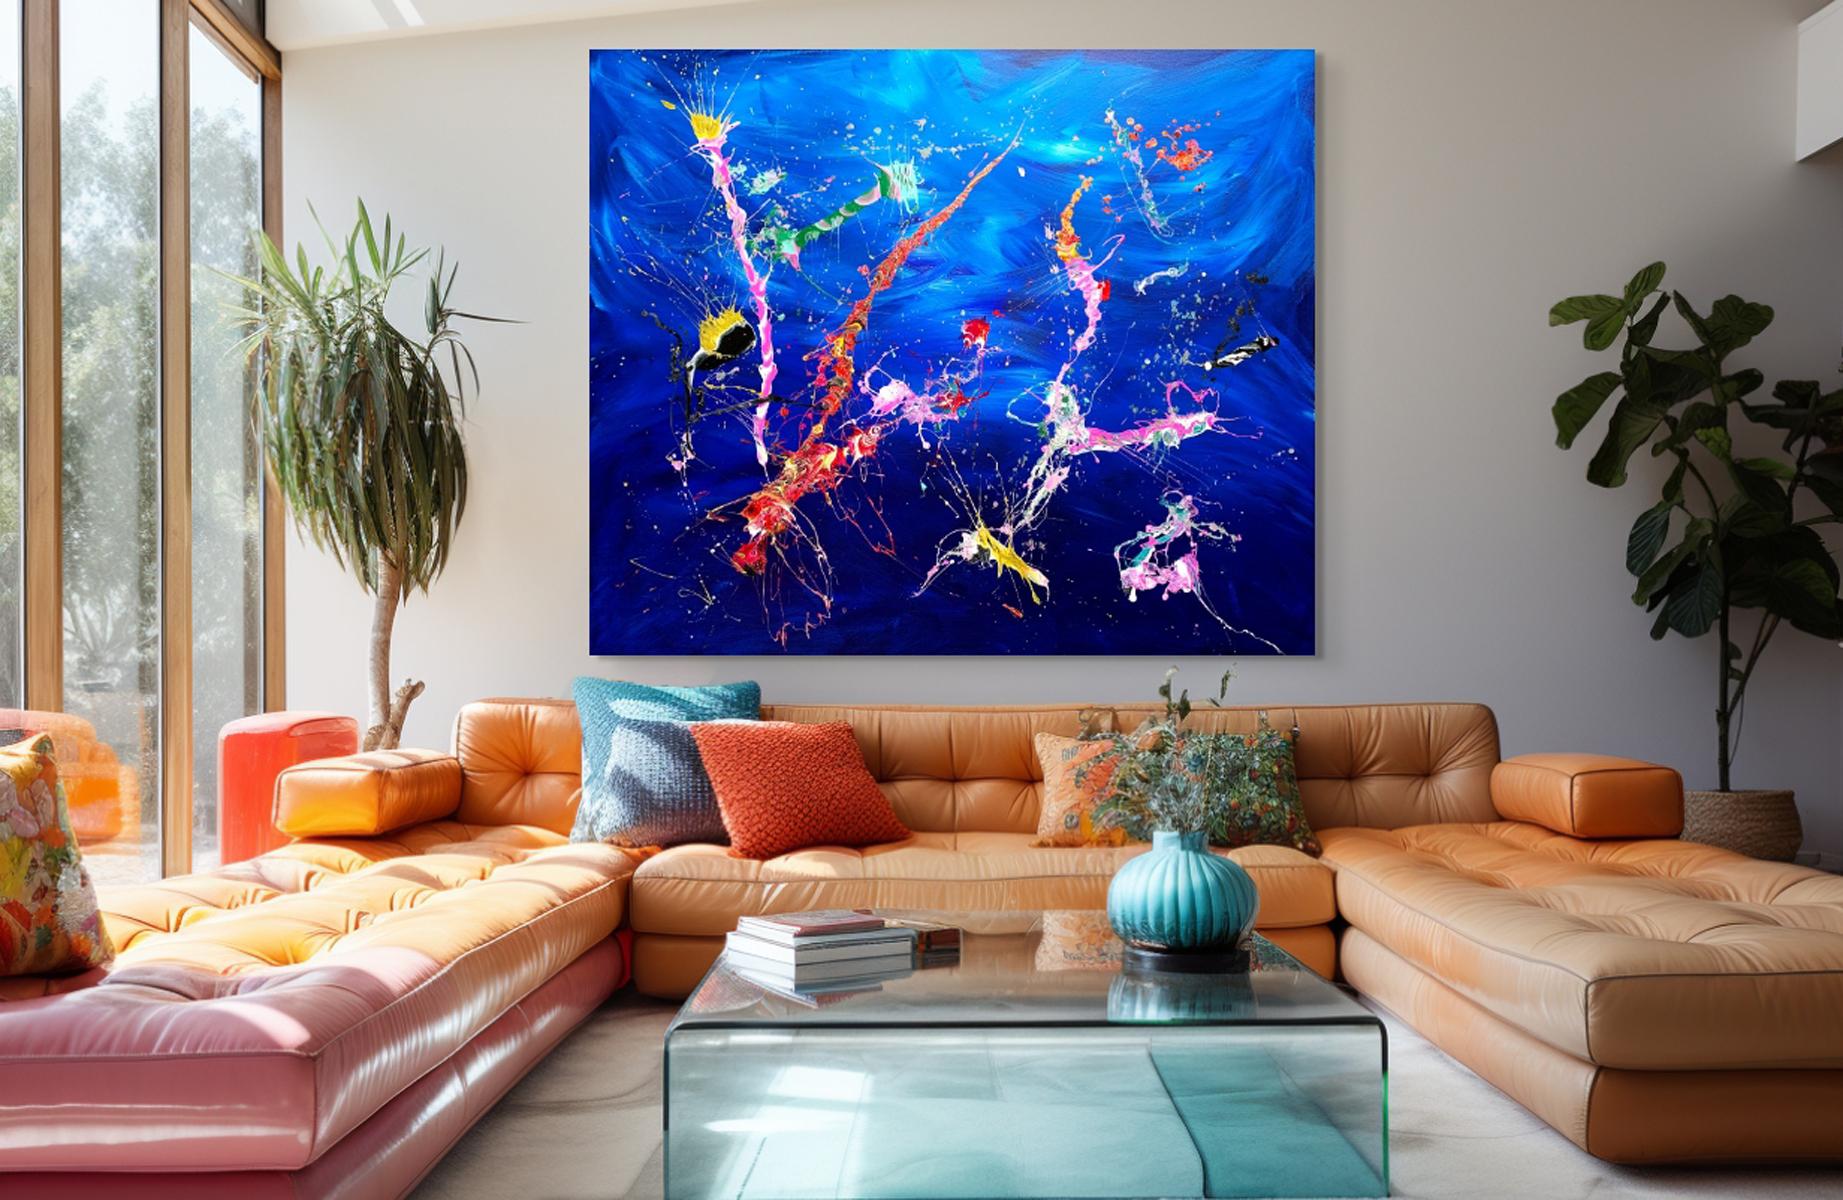 Deep Sea Creatures - The Gathering - Painting by Estelle Asmodelle